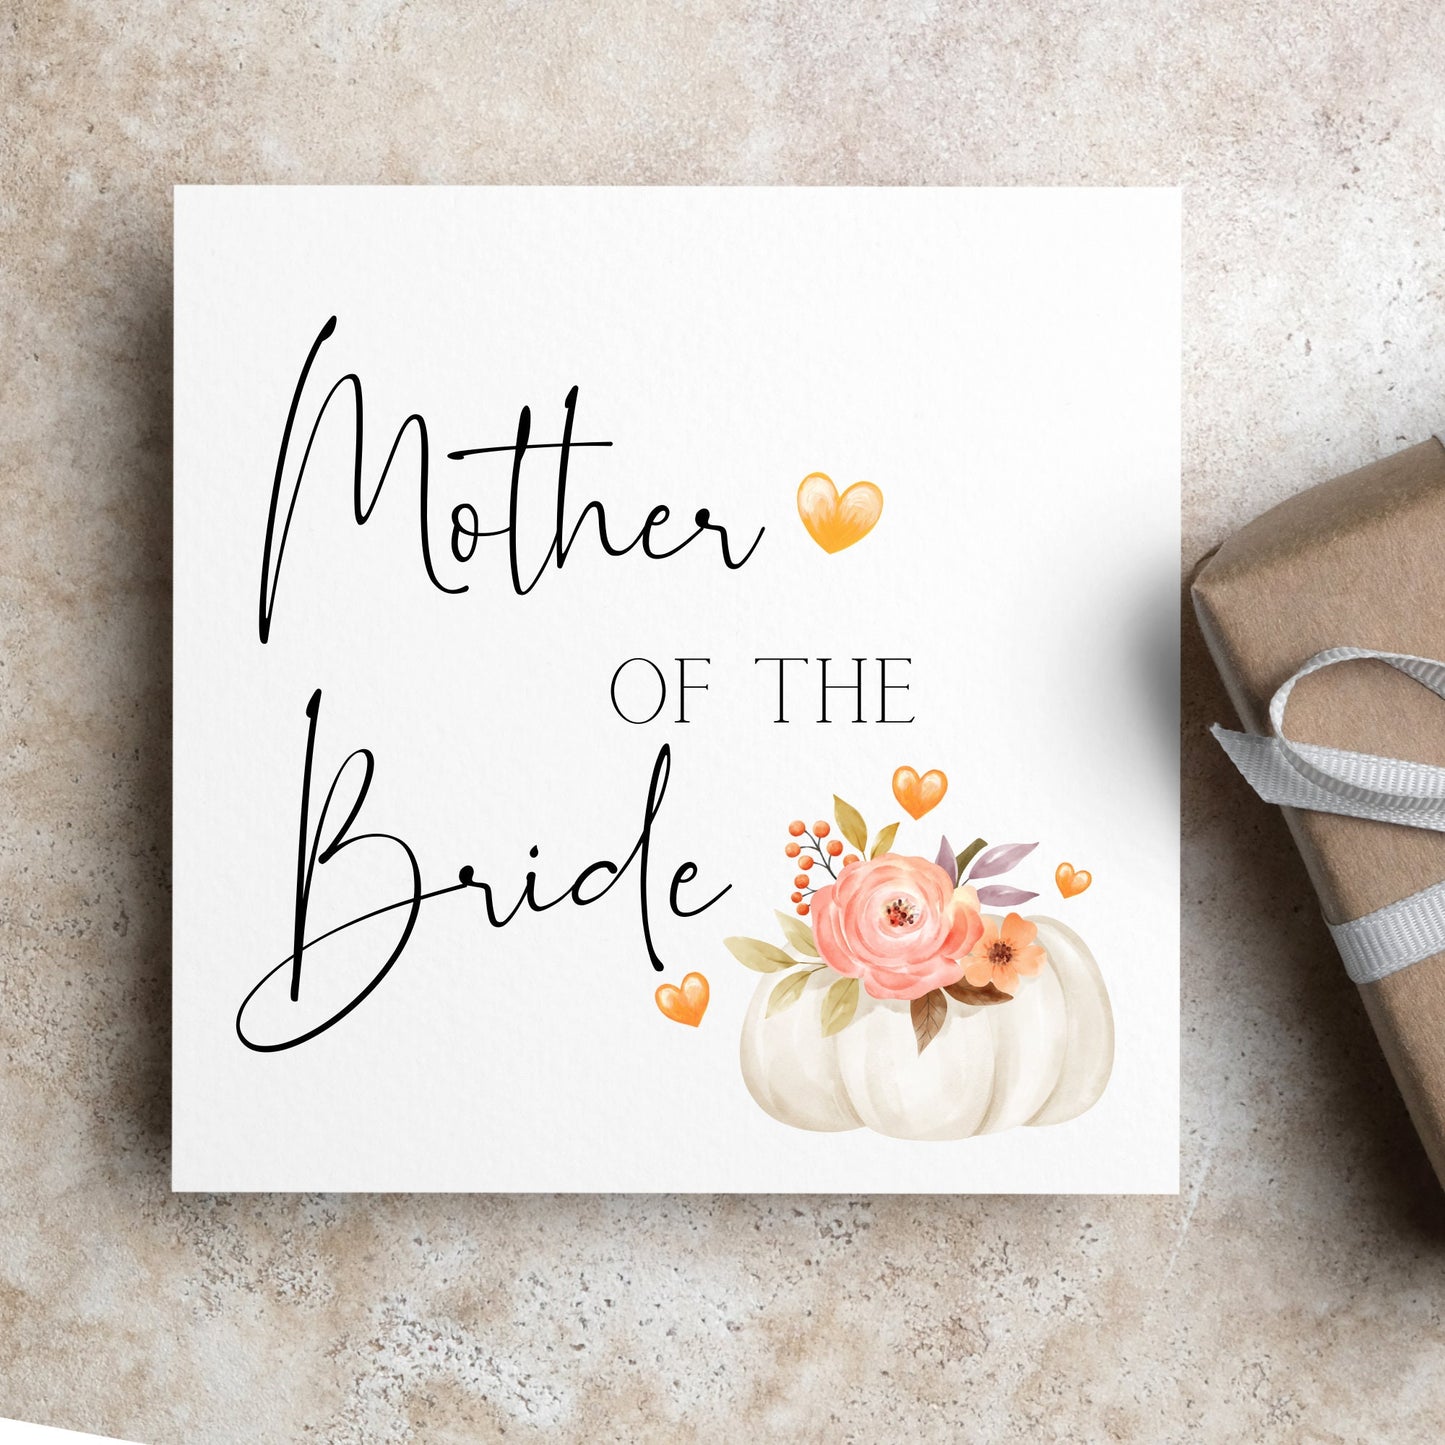 Parents of the bride card, parents of groom, sister of bride groom, mother of bride groom, autumn wedding cards for bride & groom relations